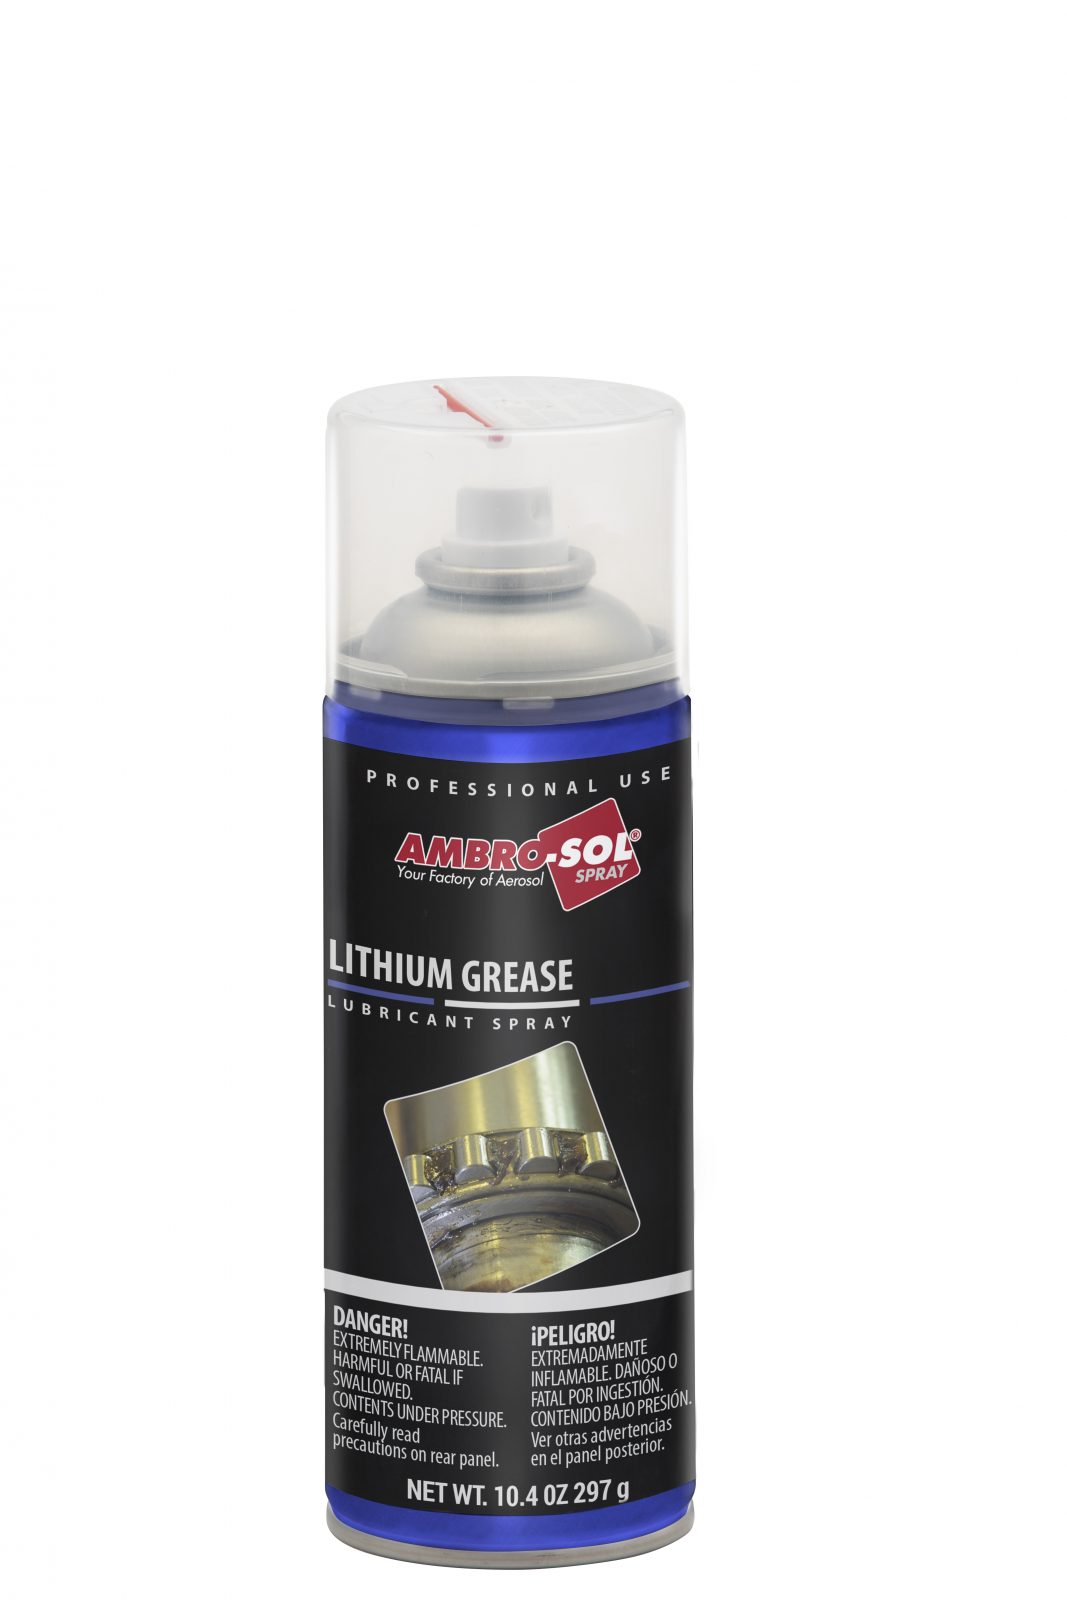 A high quality lithium grease lubricant that has a wide spectrum of uses. Great for metal on metal lubrication. Water-repellent and resistant to salt air.